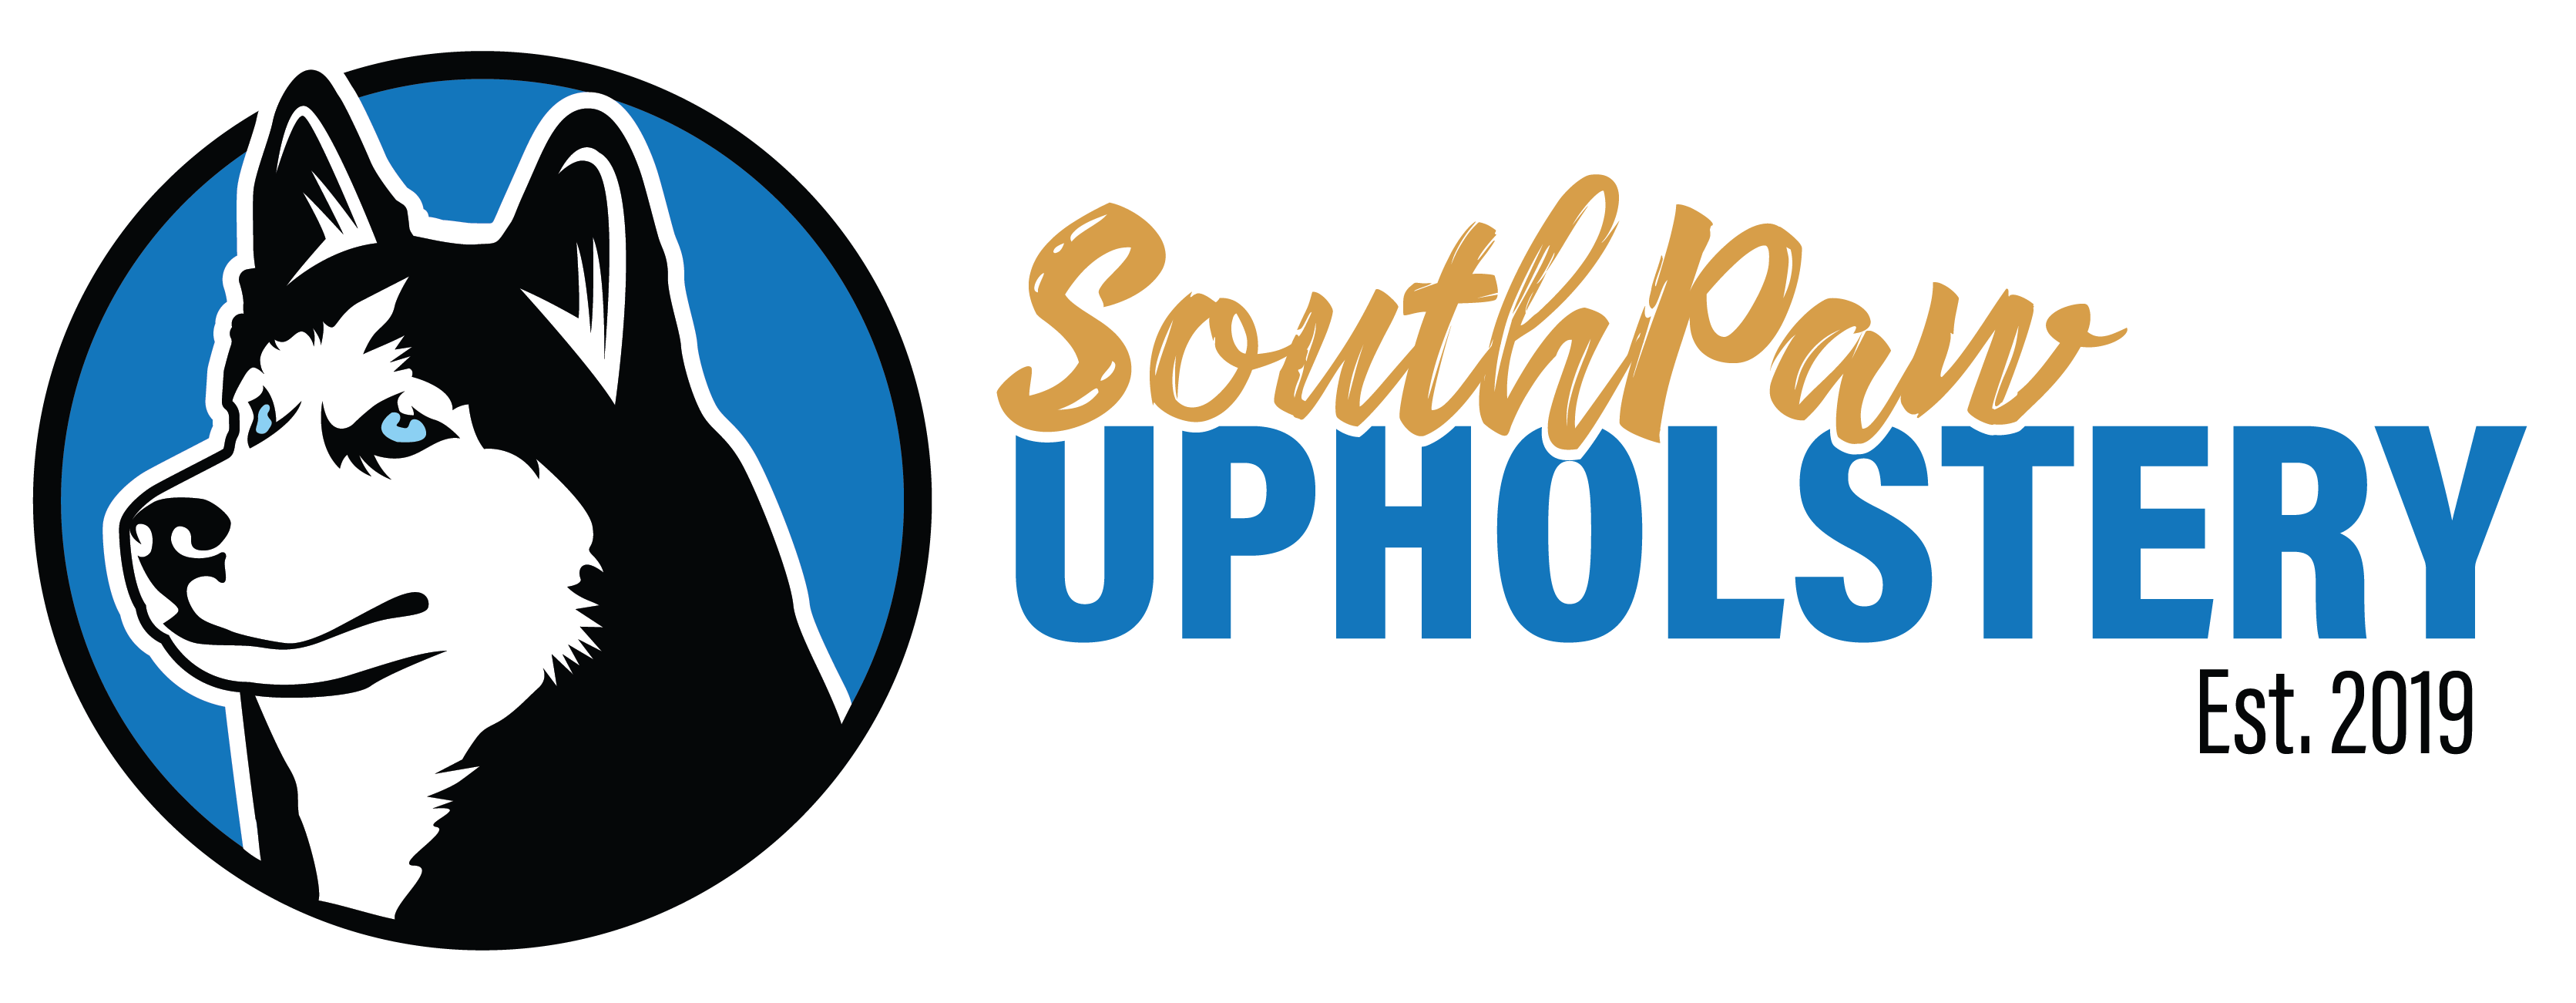 SouthPaw Upholstery